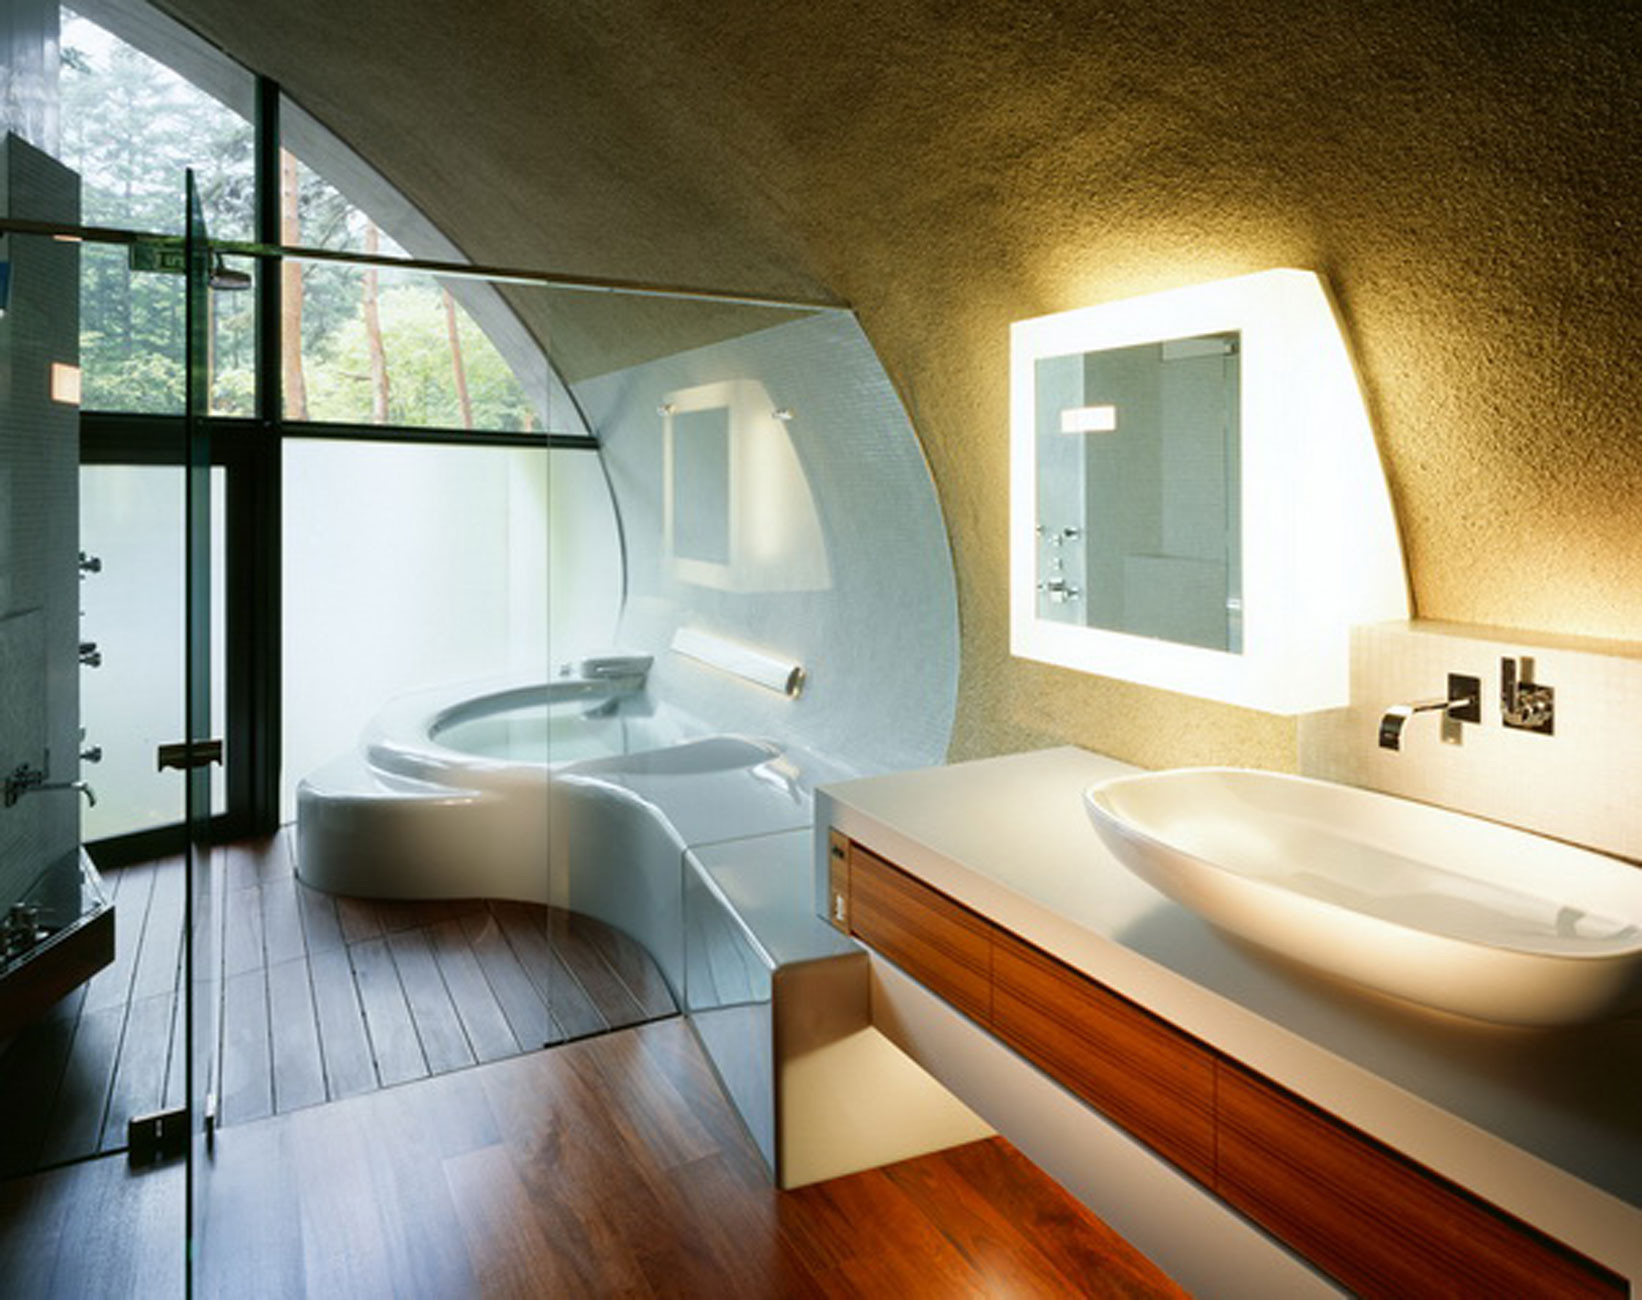 Japanese Bathroom Design
 Let Your Body Trapped in Serenity in Japanese Bathroom